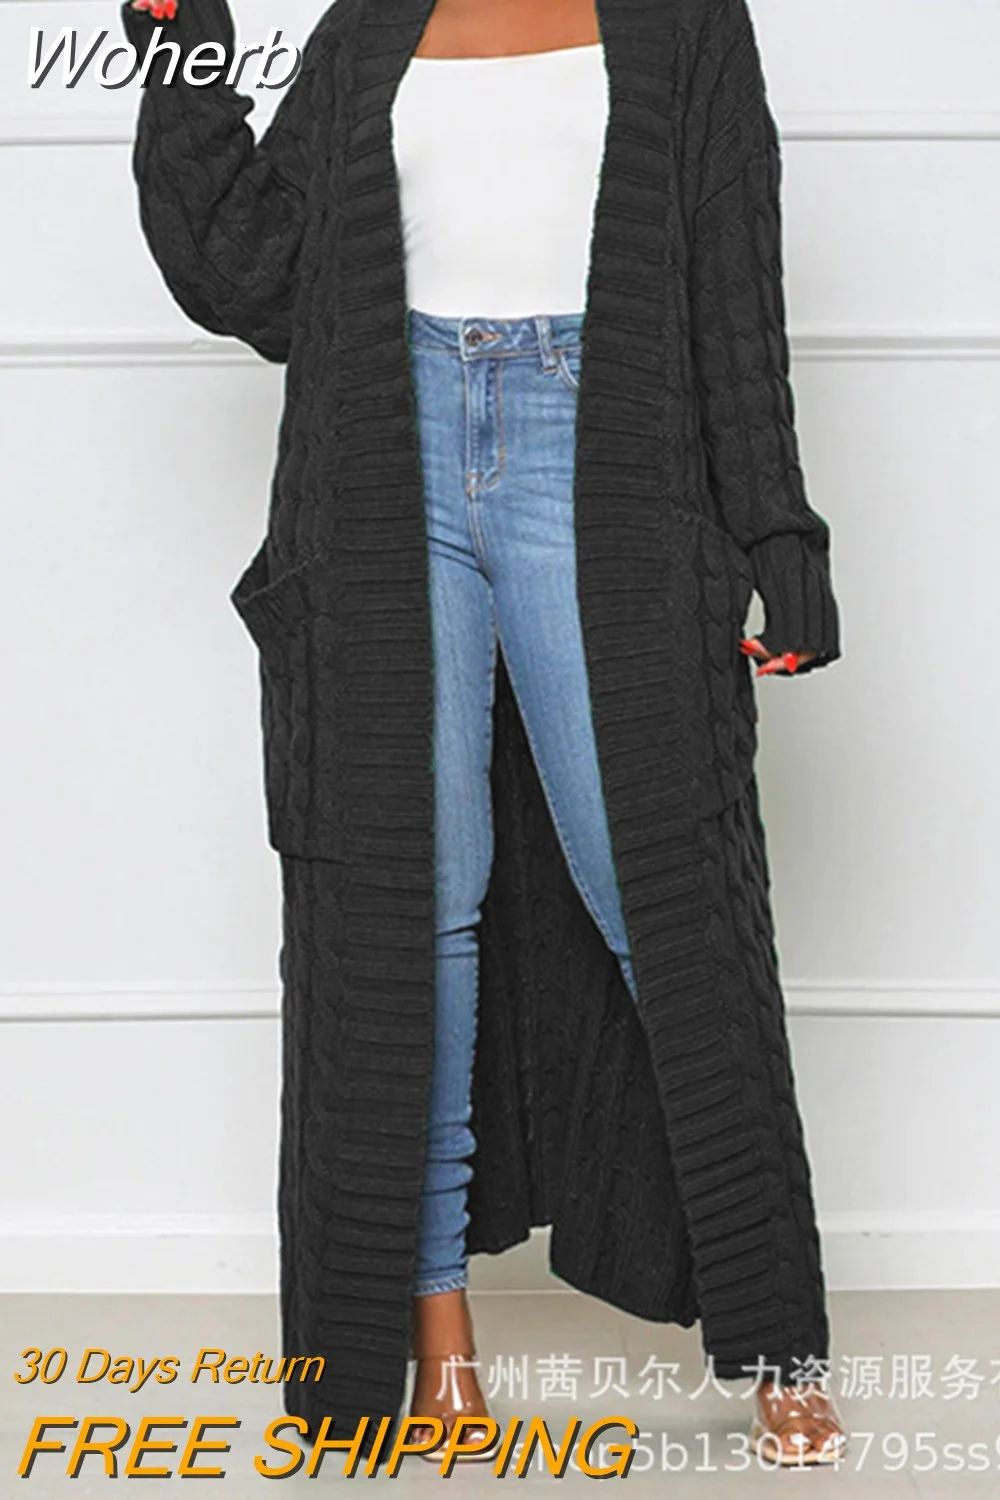 Woherb Front Cable Knit Longline Cardigan Women Long Sleeve Loose Fashion Casual Open Cardigan Knitwear Solid Color